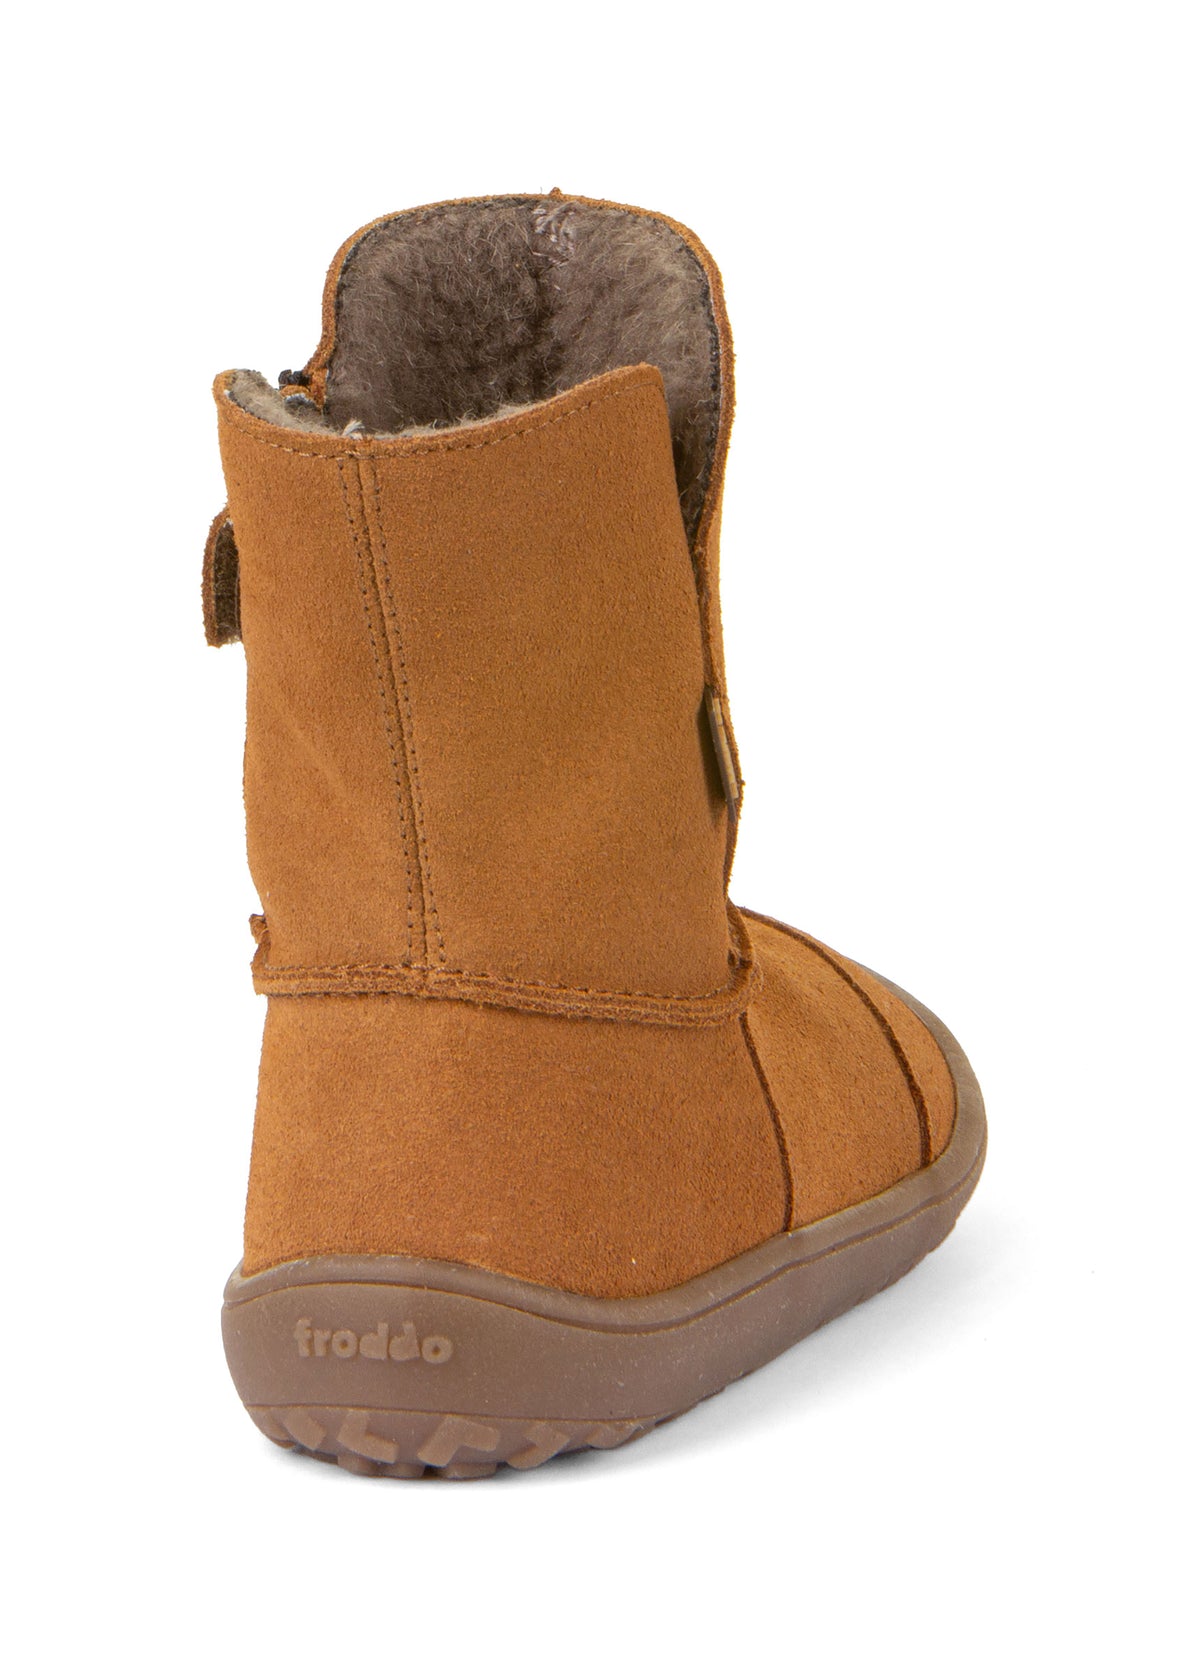 Barefoot shoes - leather winter boots, TEX Suede - cognac brown